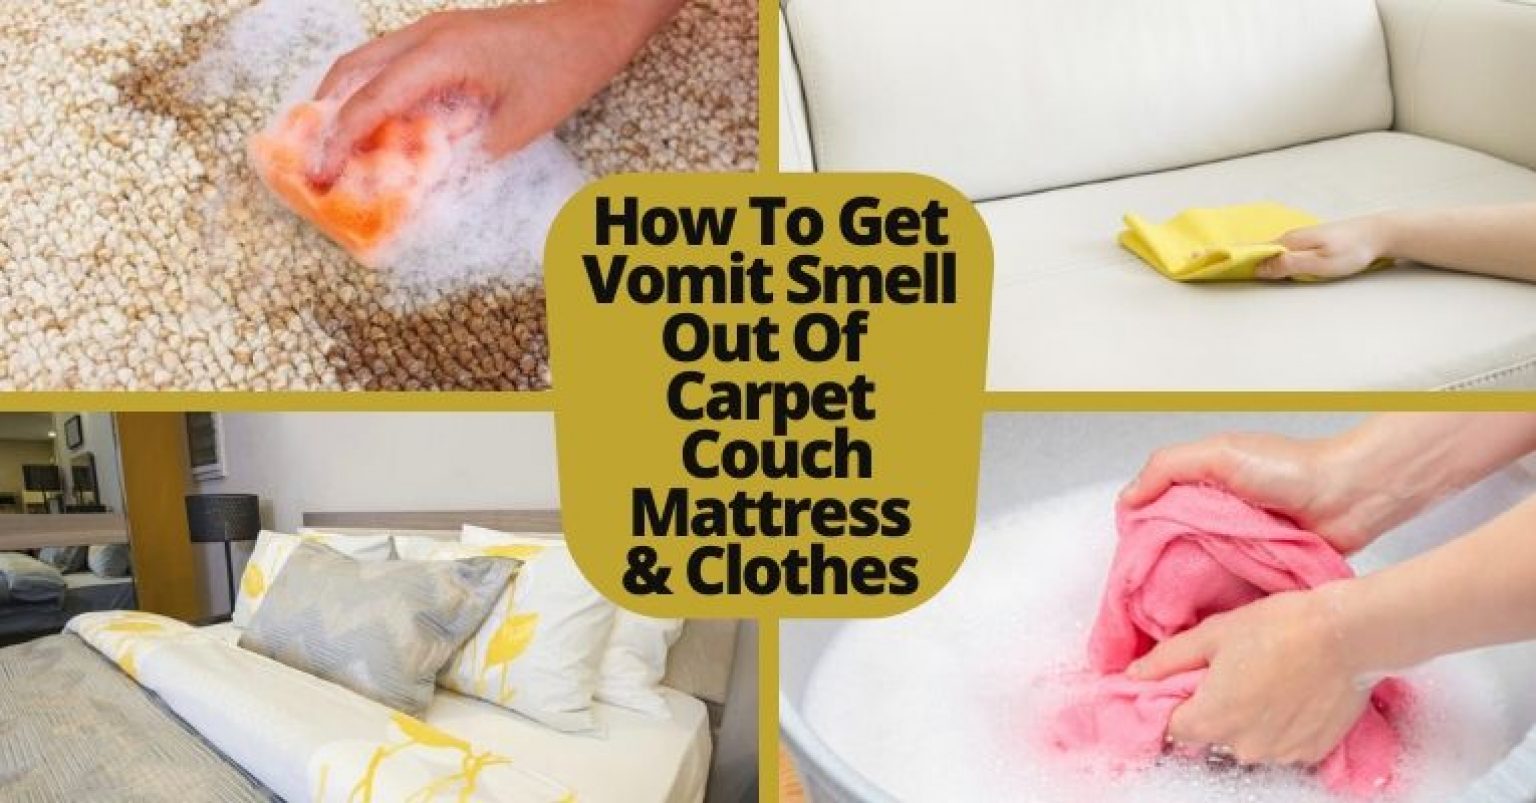 How To Get Vomit Smell Out Of Carpet, Couch, Mattress